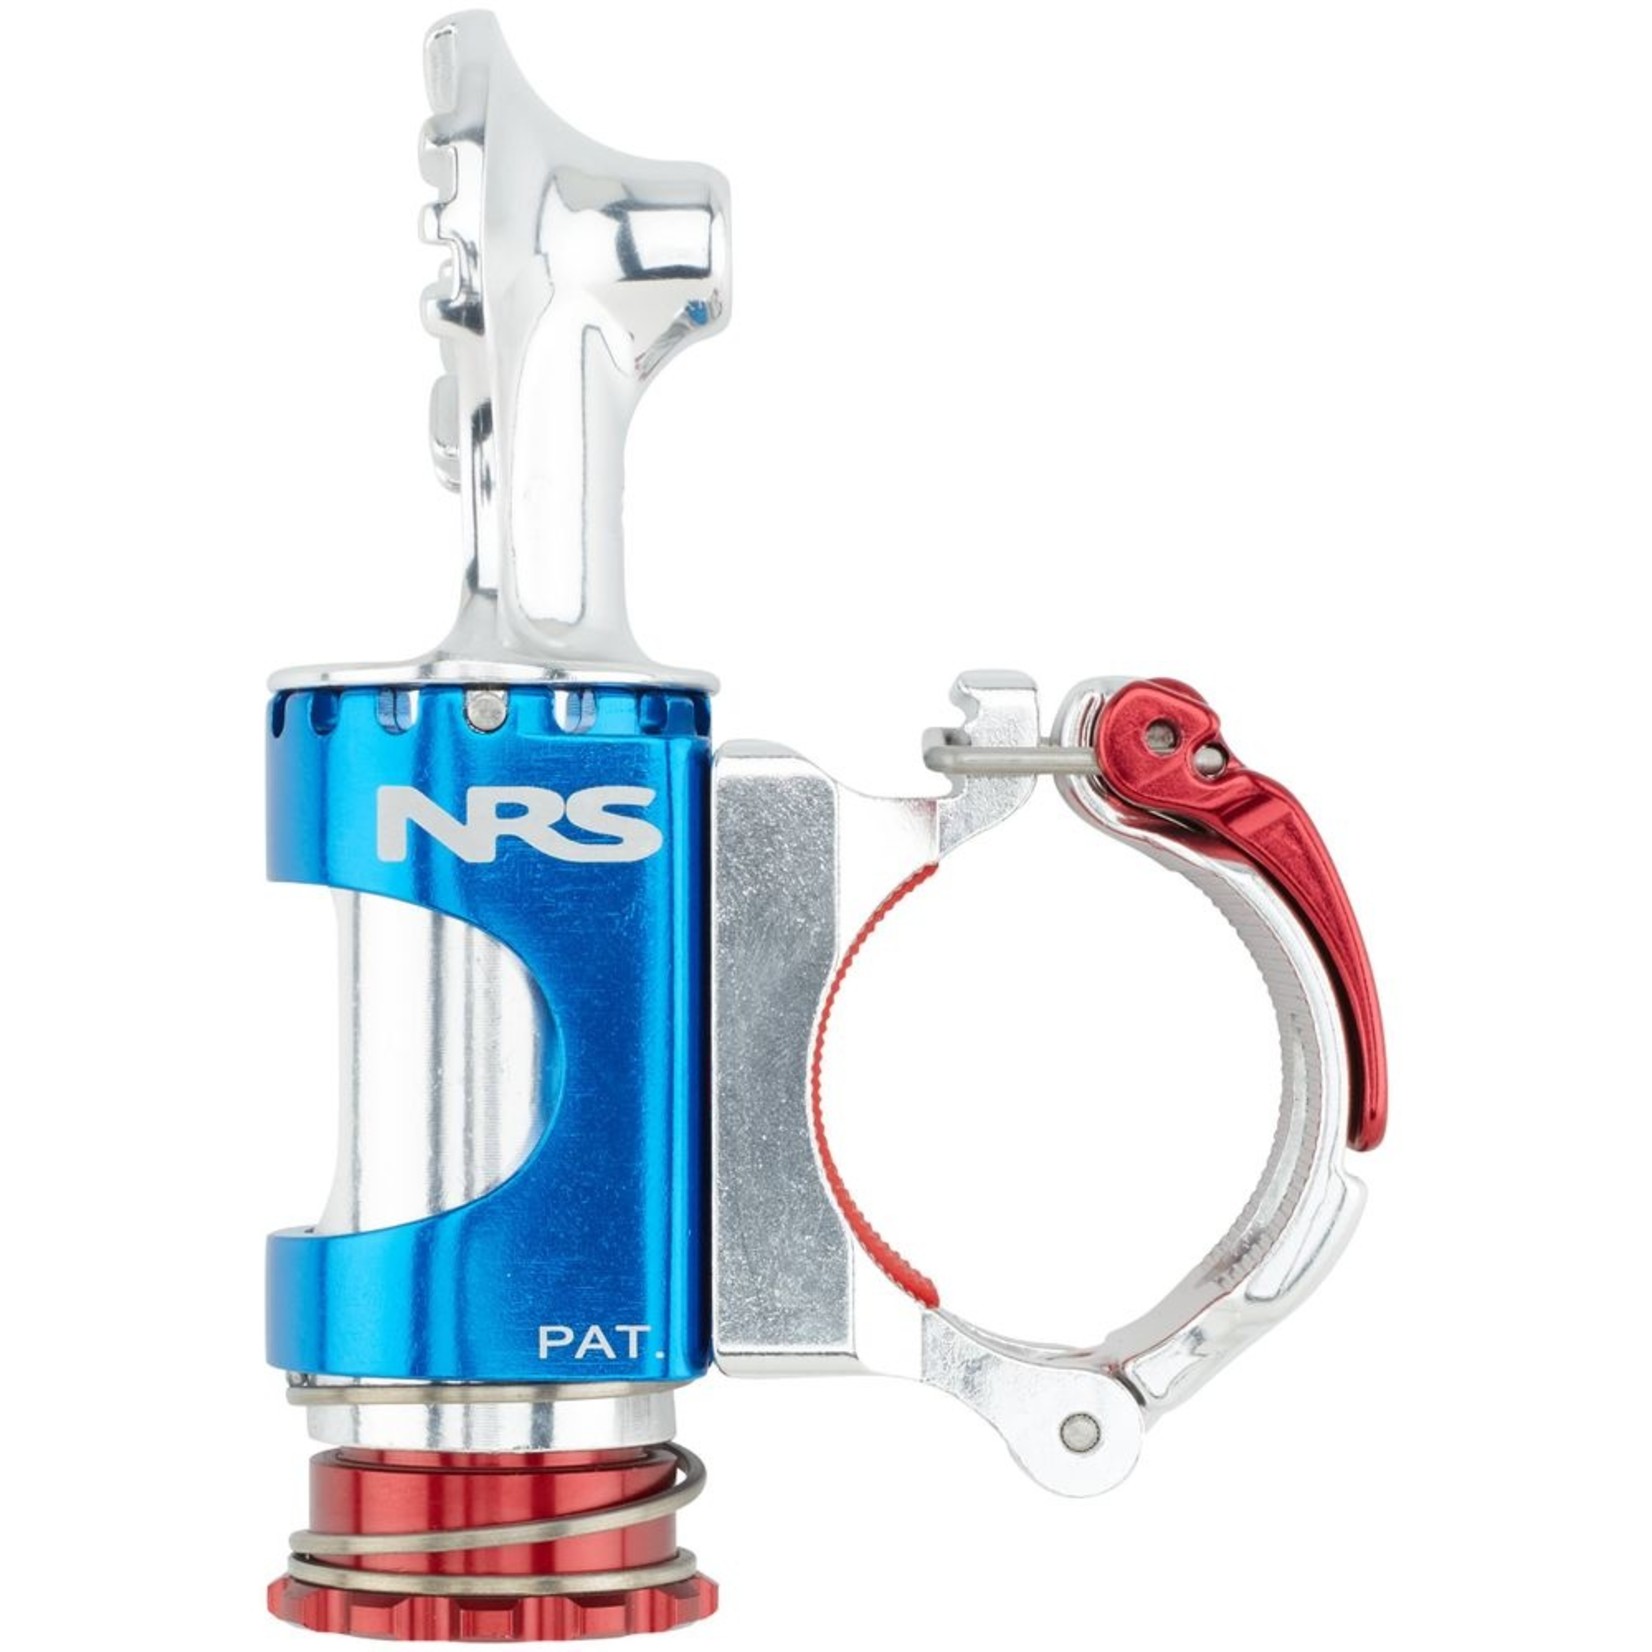 NRS, Inc NRS ClampIT Rod Holder Attachment